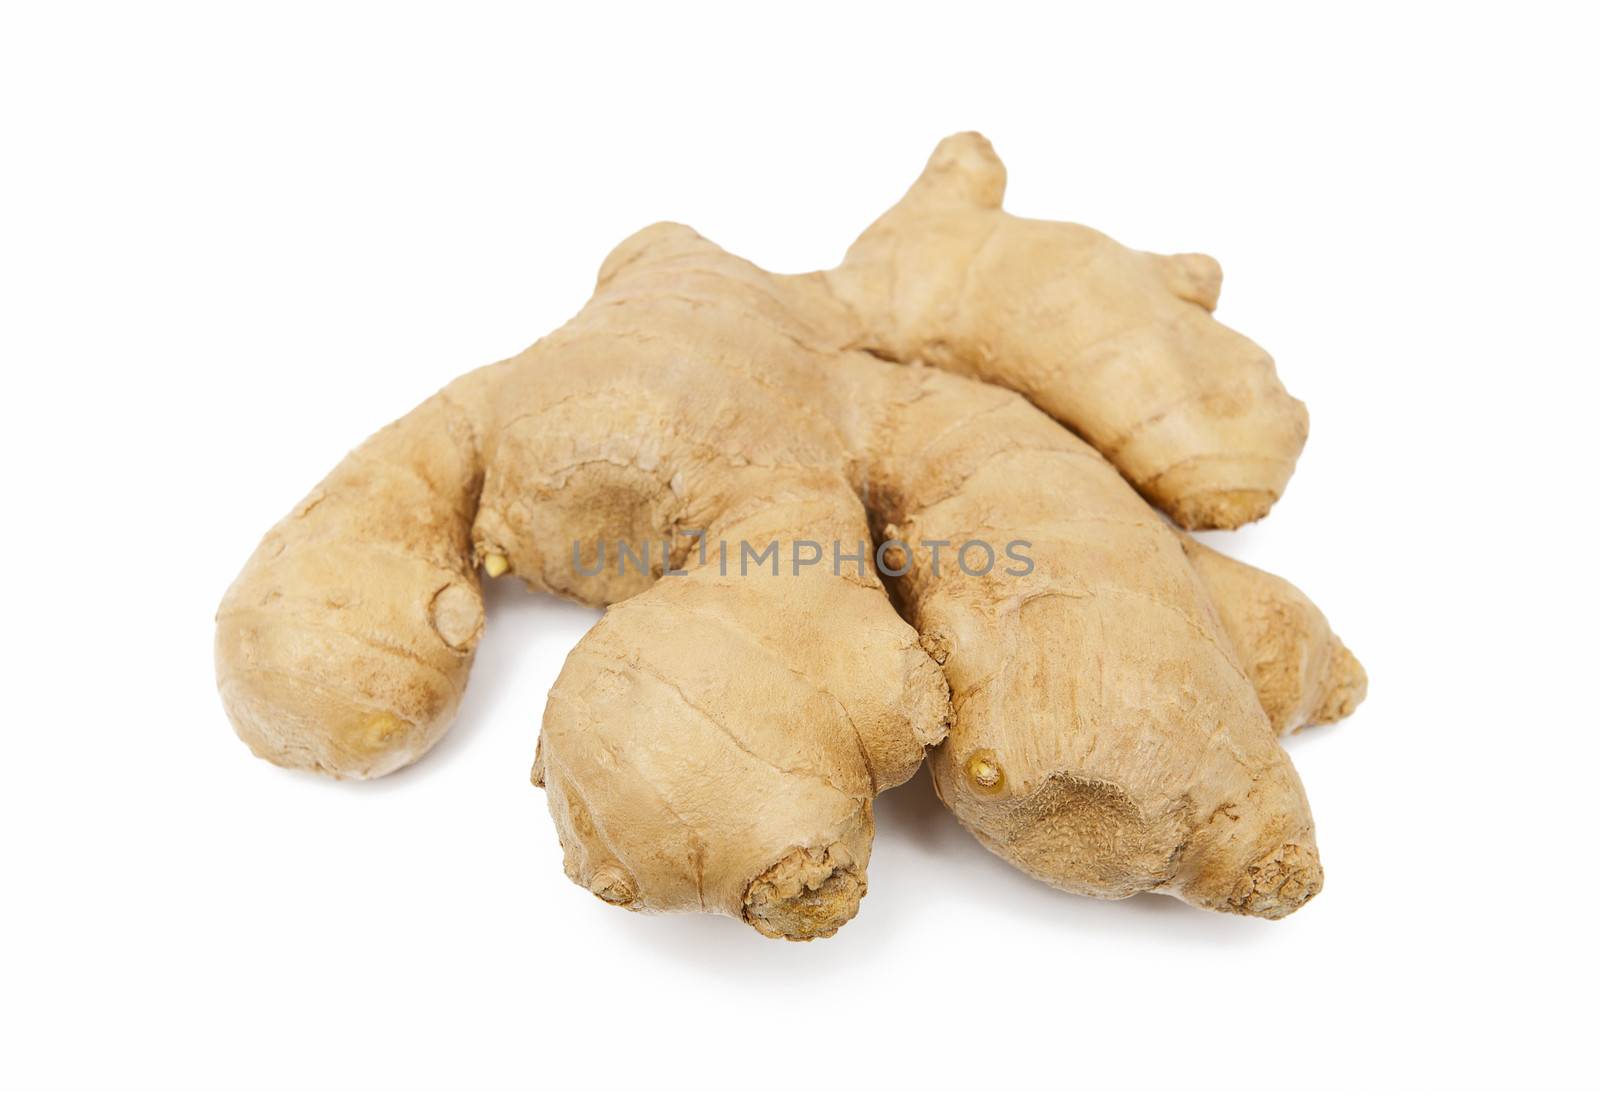 Ginger isolated on the white background